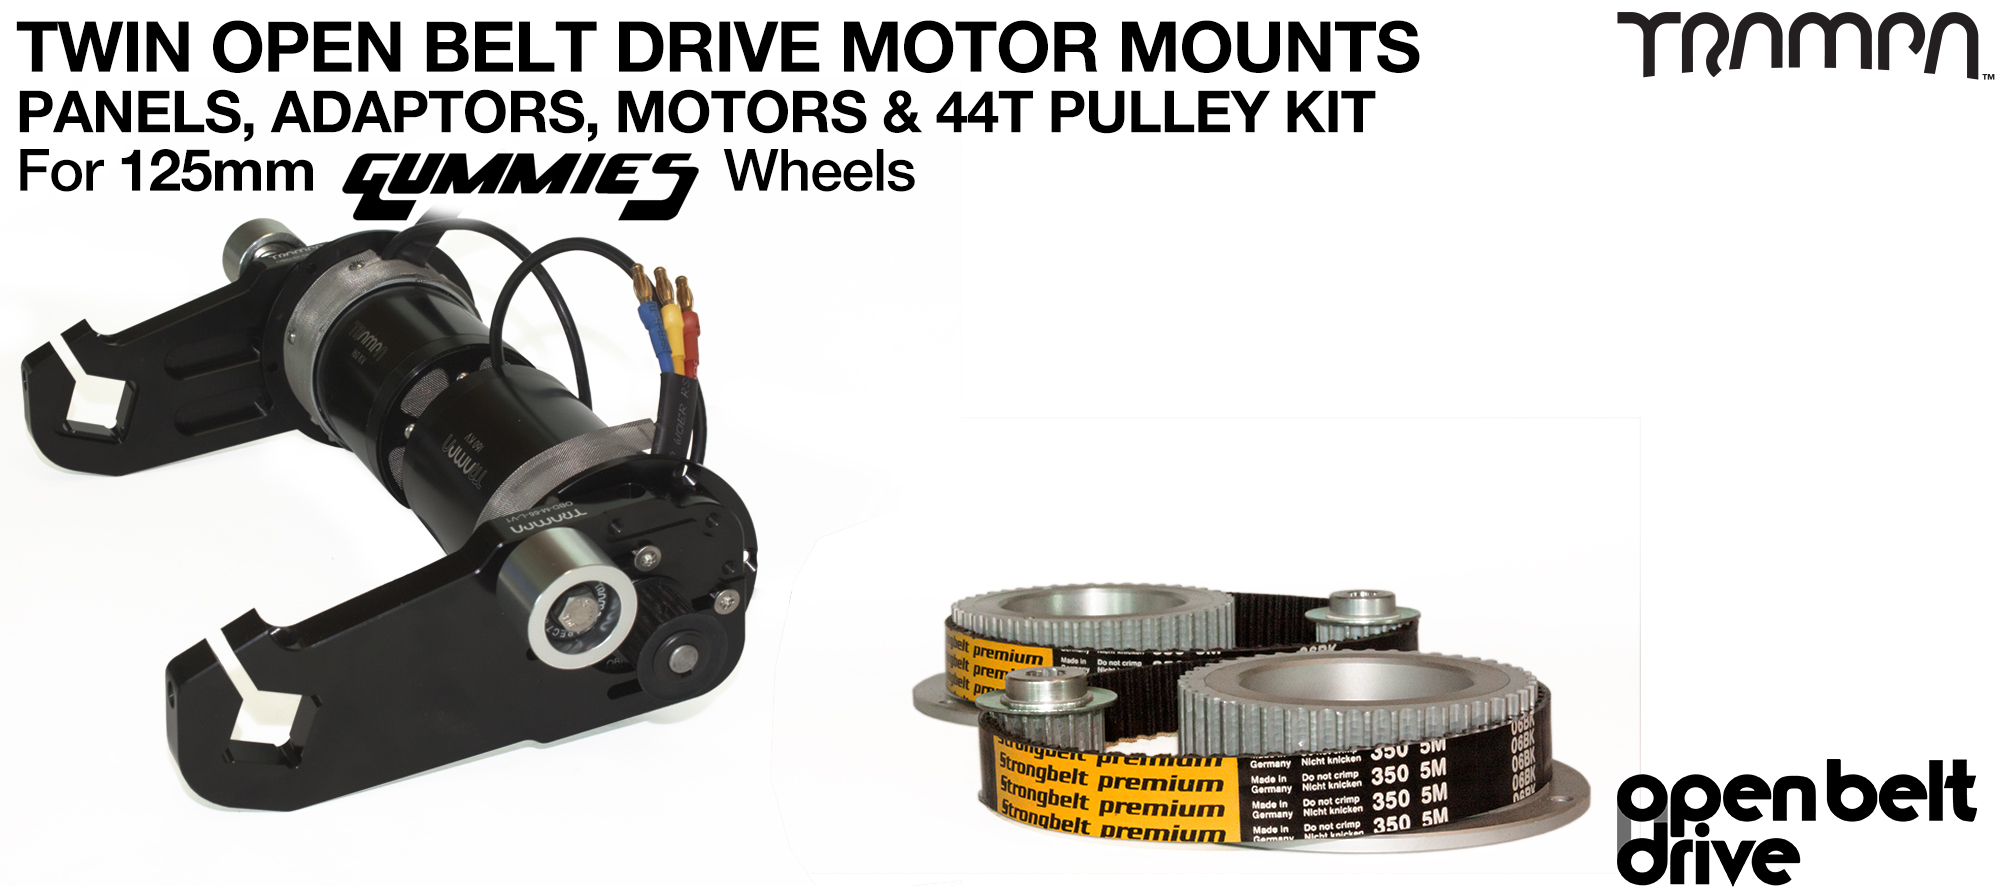 66T OBD Motor Mount with 44T Pulley kit & custom Motor - TWIN